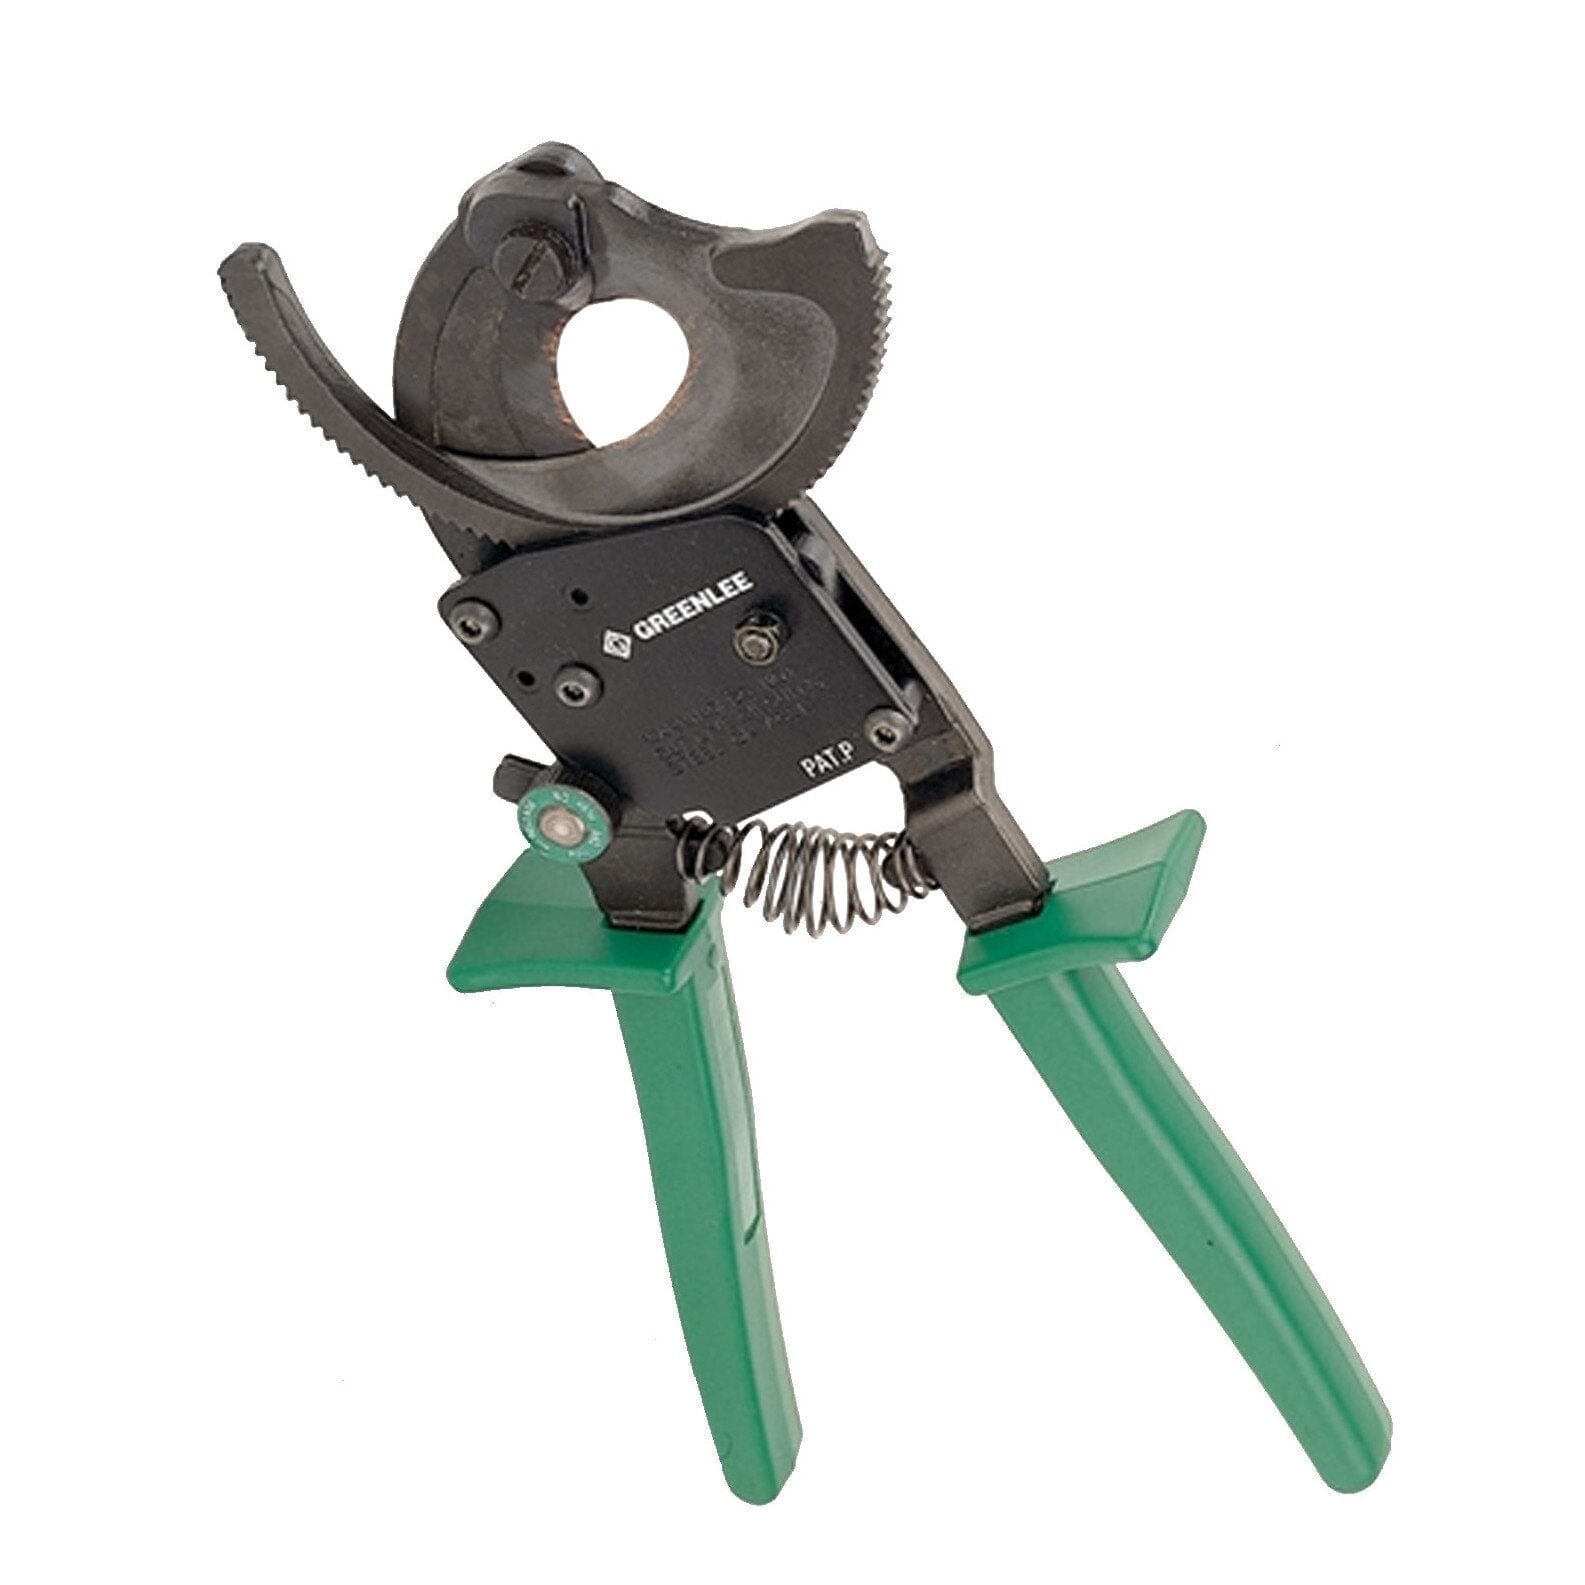 Greenlee Ratchet Cable Cutter - 759 Cutters Greenlee 